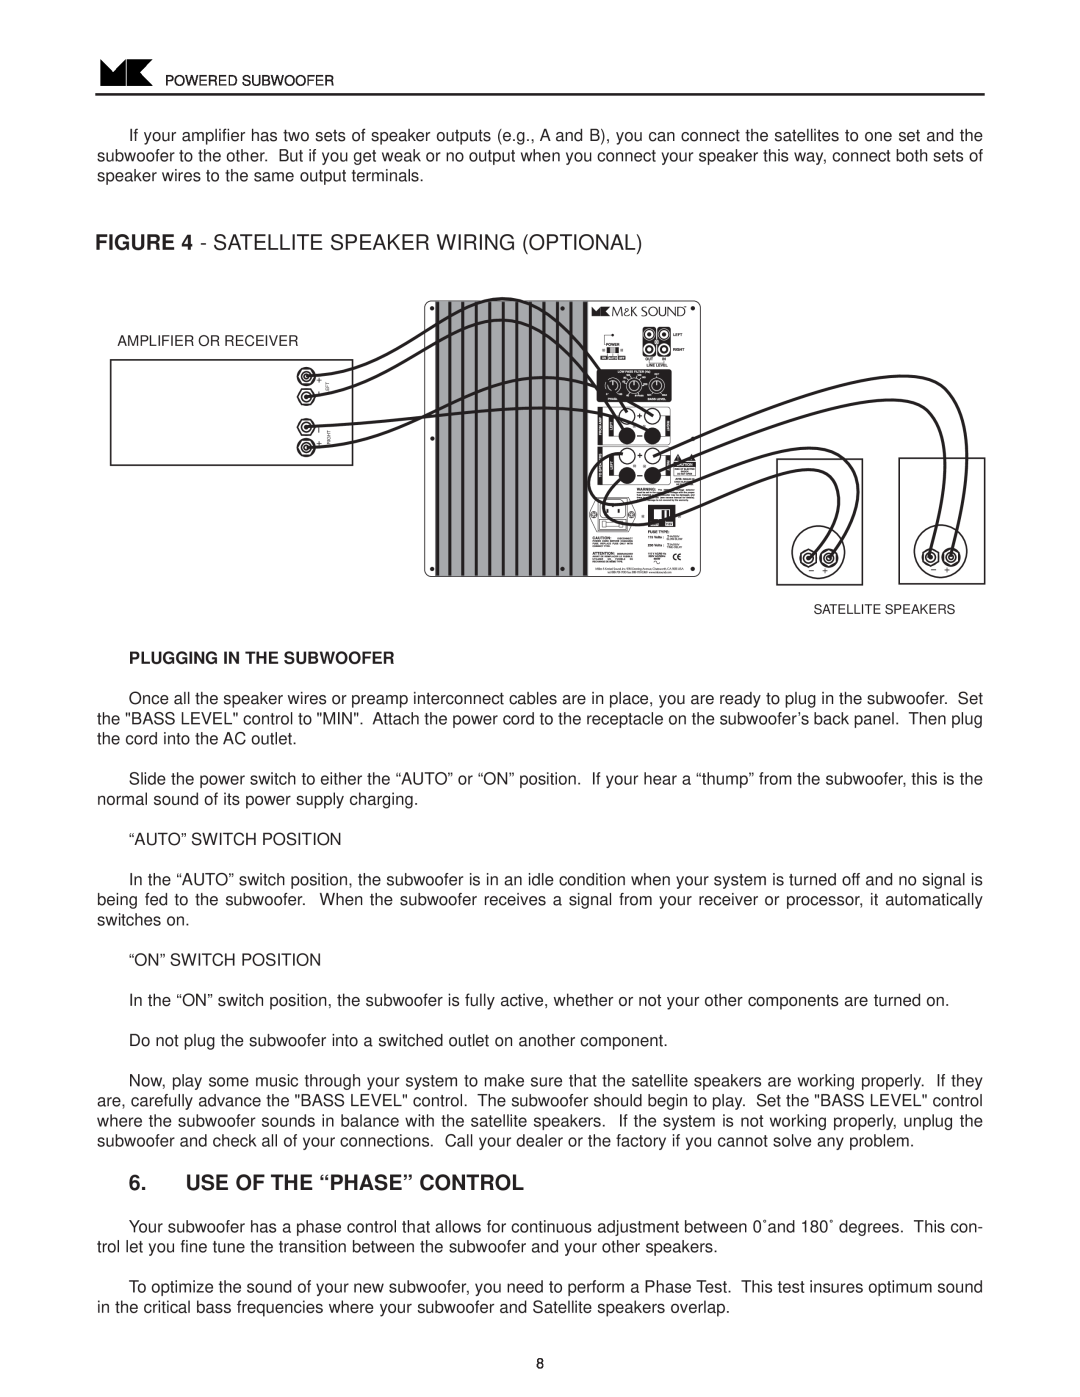 MK Sound VX-1250 operation manual Satellite Speaker Wiring Optional, Use Of The “Phase” Control, Plugging In The Subwoofer 